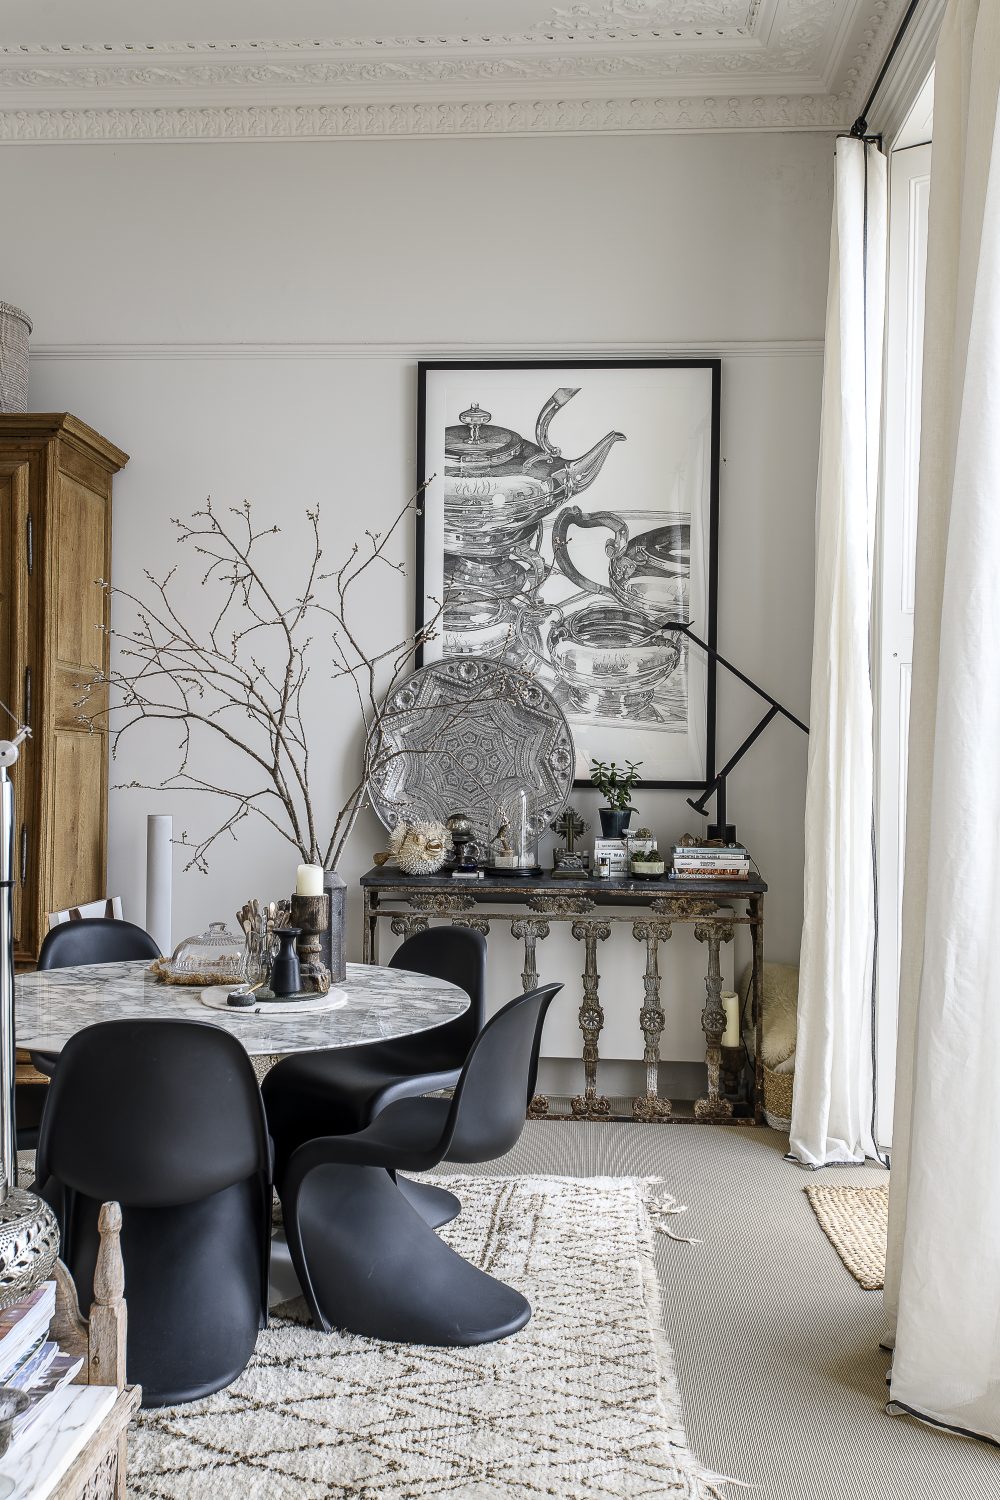 Contemporary dining chairs are arranged around a Saarinen Tulip dining table from the Conran Shop, providing a social dining space